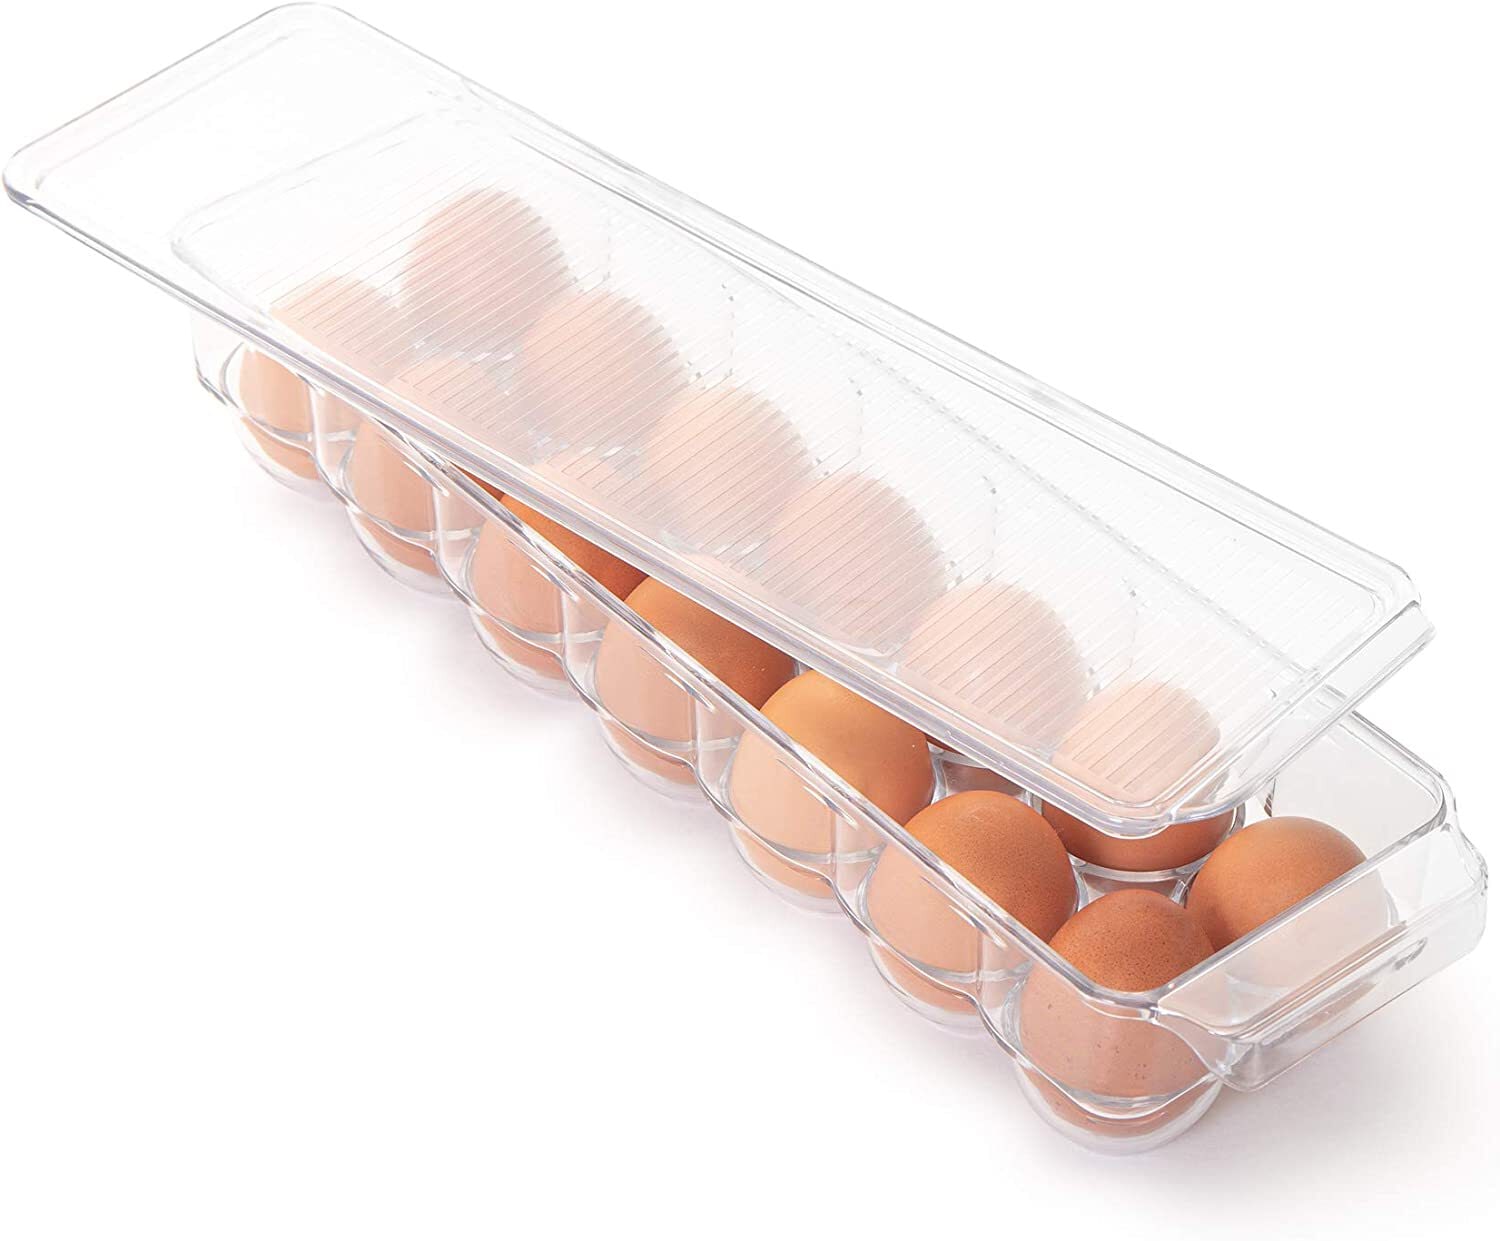 Sorbus Plastic Storage Bins Stackable Clear Pantry Organizer Box Bin For  Organizing Kitchen Fridge,Pantry, Bathroom, Wide & Narrow Deep Container  Set & Reviews